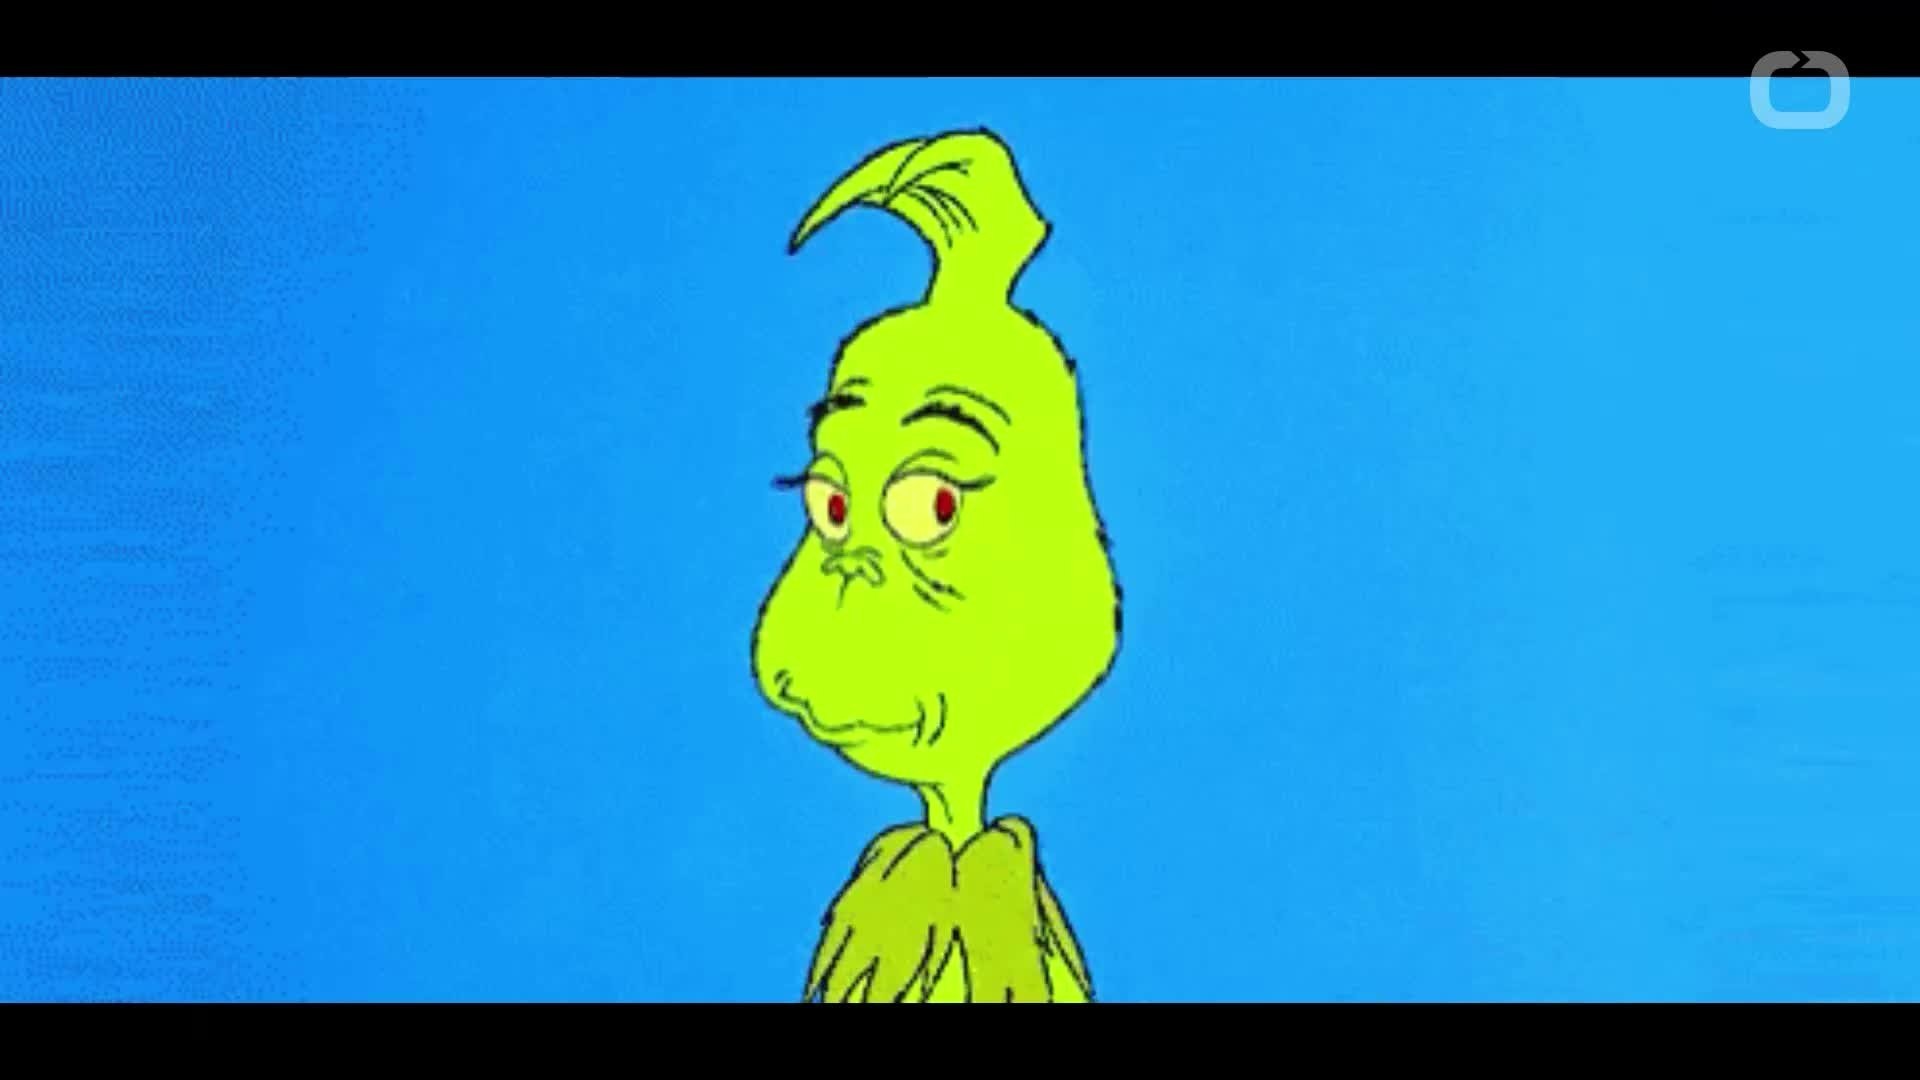 1920x1080 It Turns Out There's A Prequel To 'How the Grinch Stole Christmas'